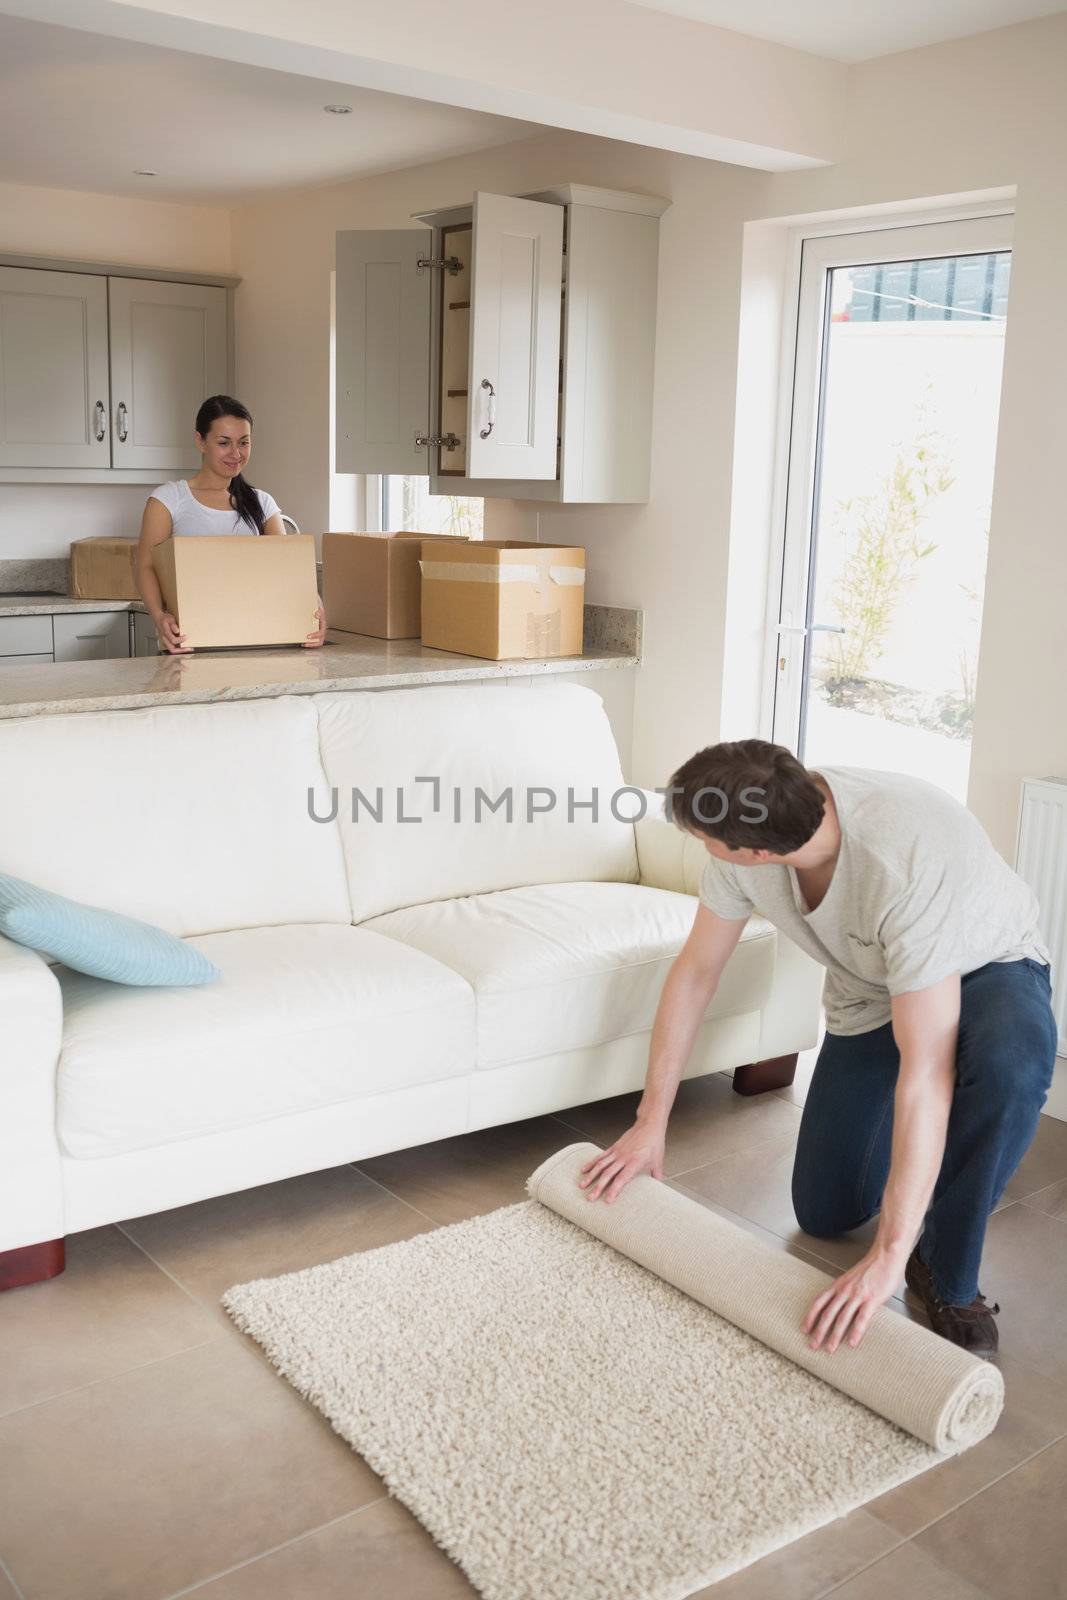 Two young people furnishing the kitchen and living room for a relocation